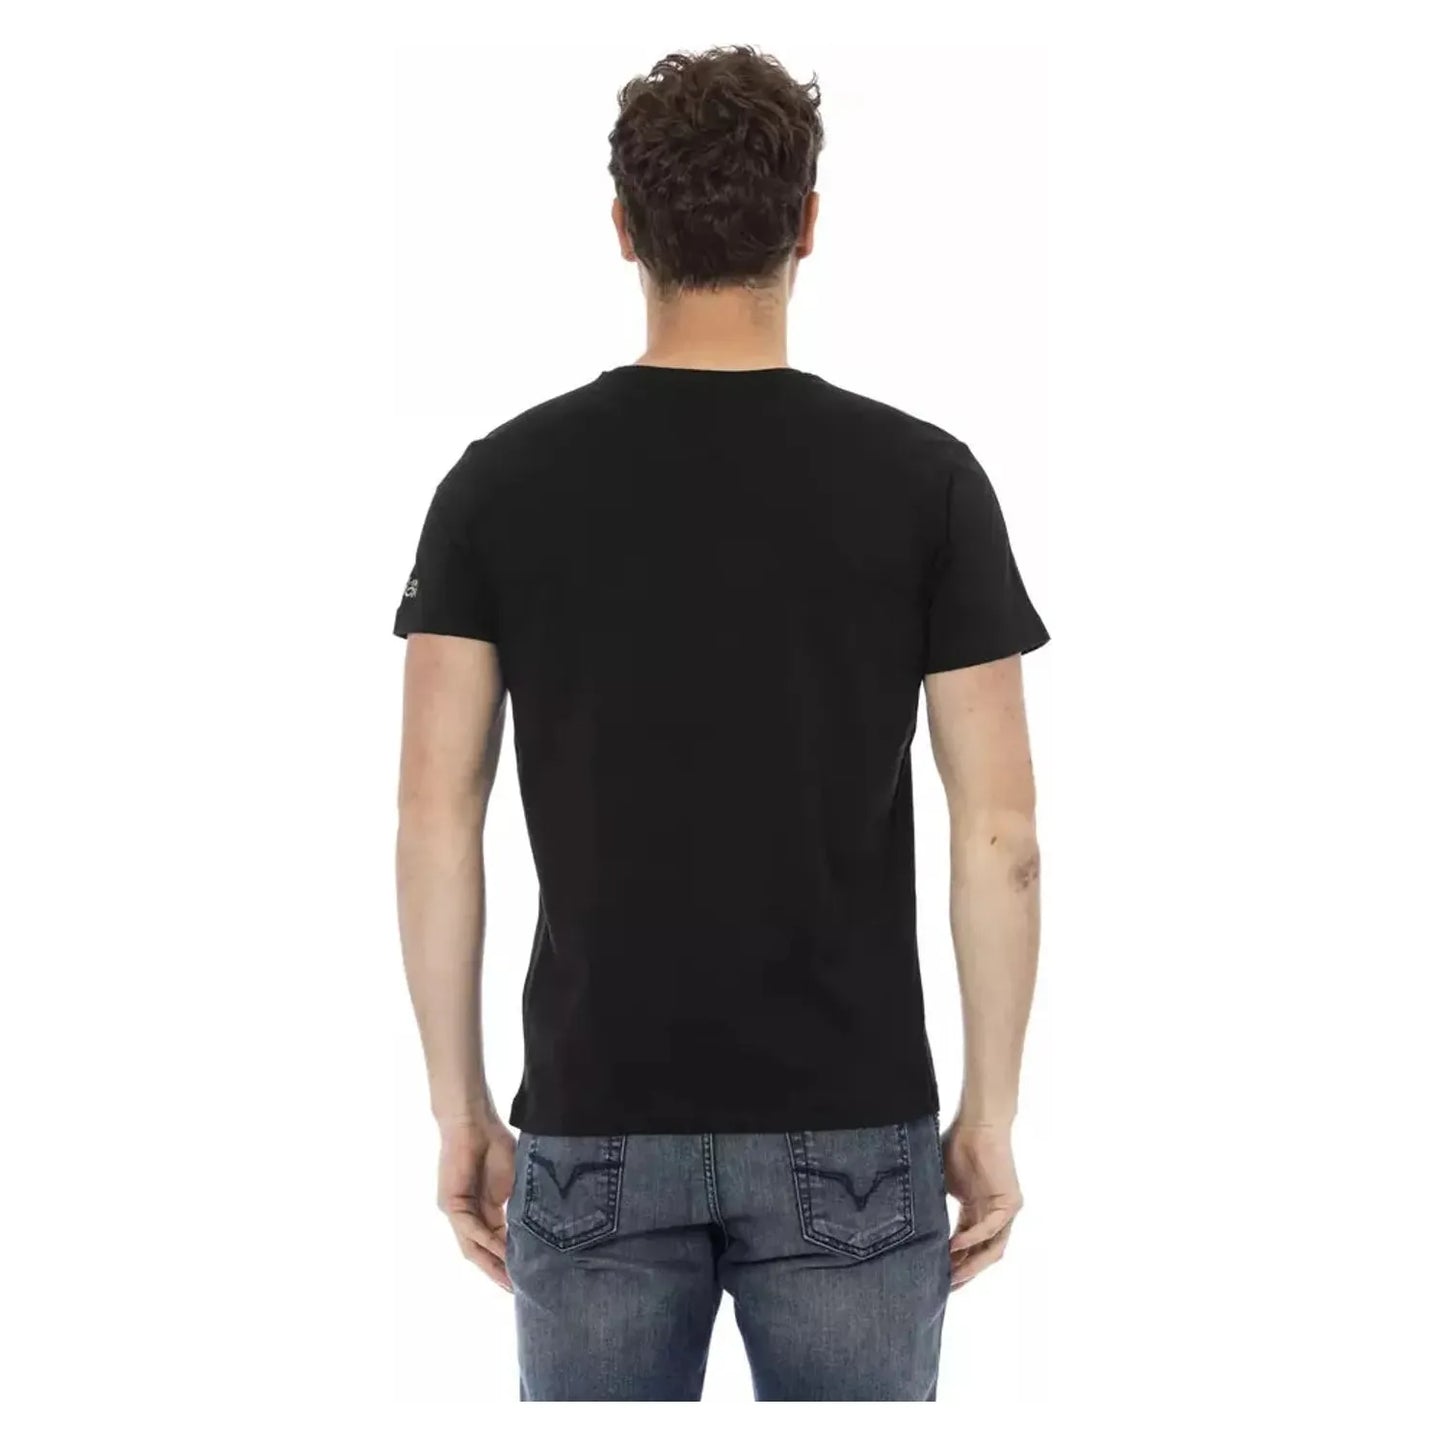 Trussardi Action Elevated Casual Black Tee - Short Sleeve & Round Neck black-cotton-t-shirt-70